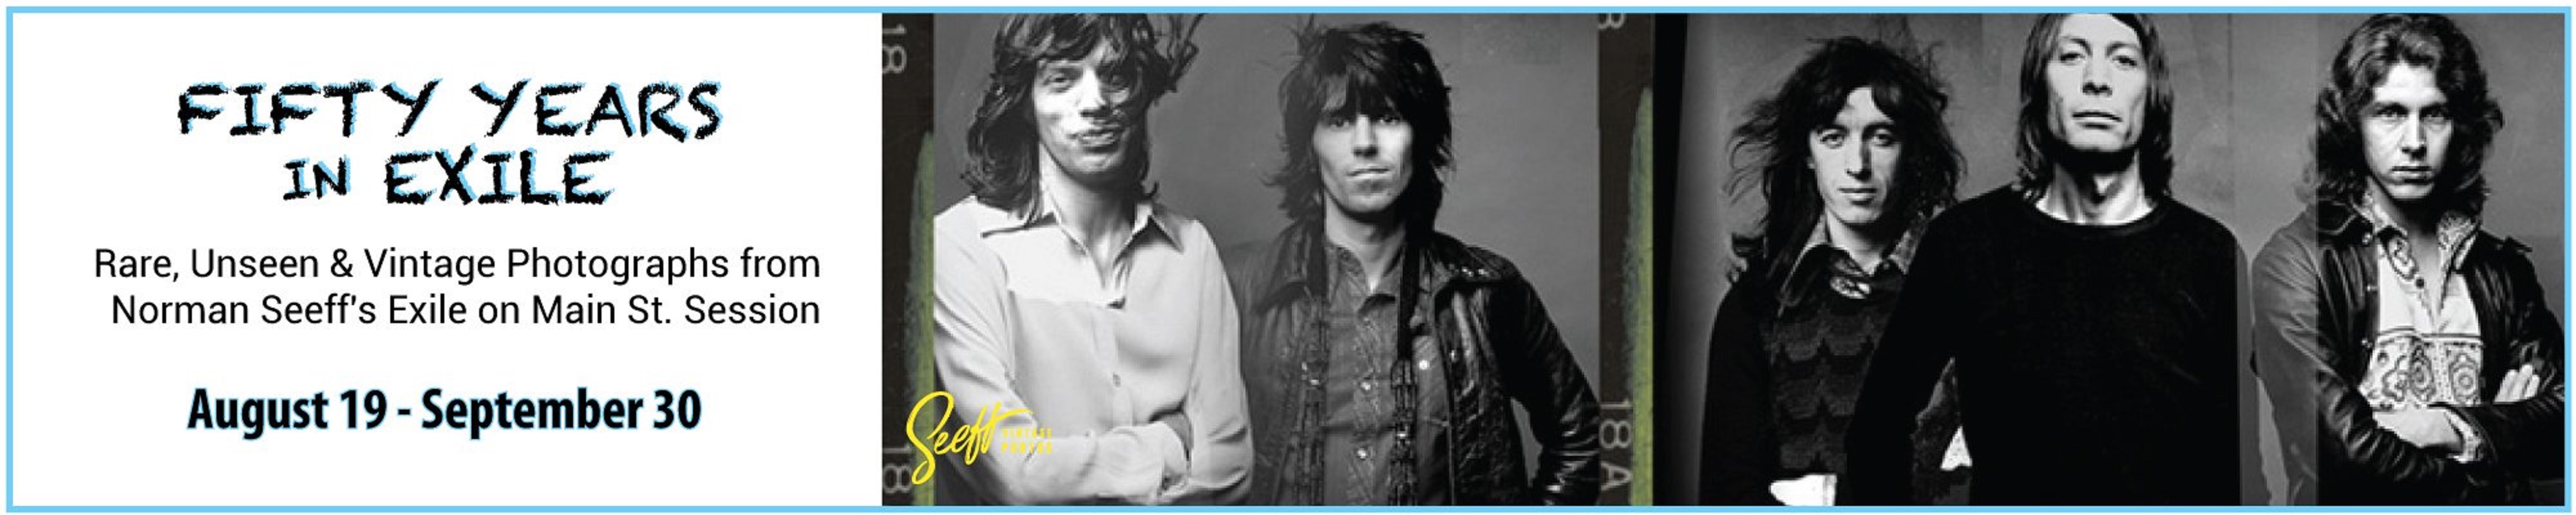 Modern Rocks Gallery announces 'Fifty Years in Exile' feat. unseen photos from The Rolling Stones’ 1972 session; Aug. 19-Sept. 30